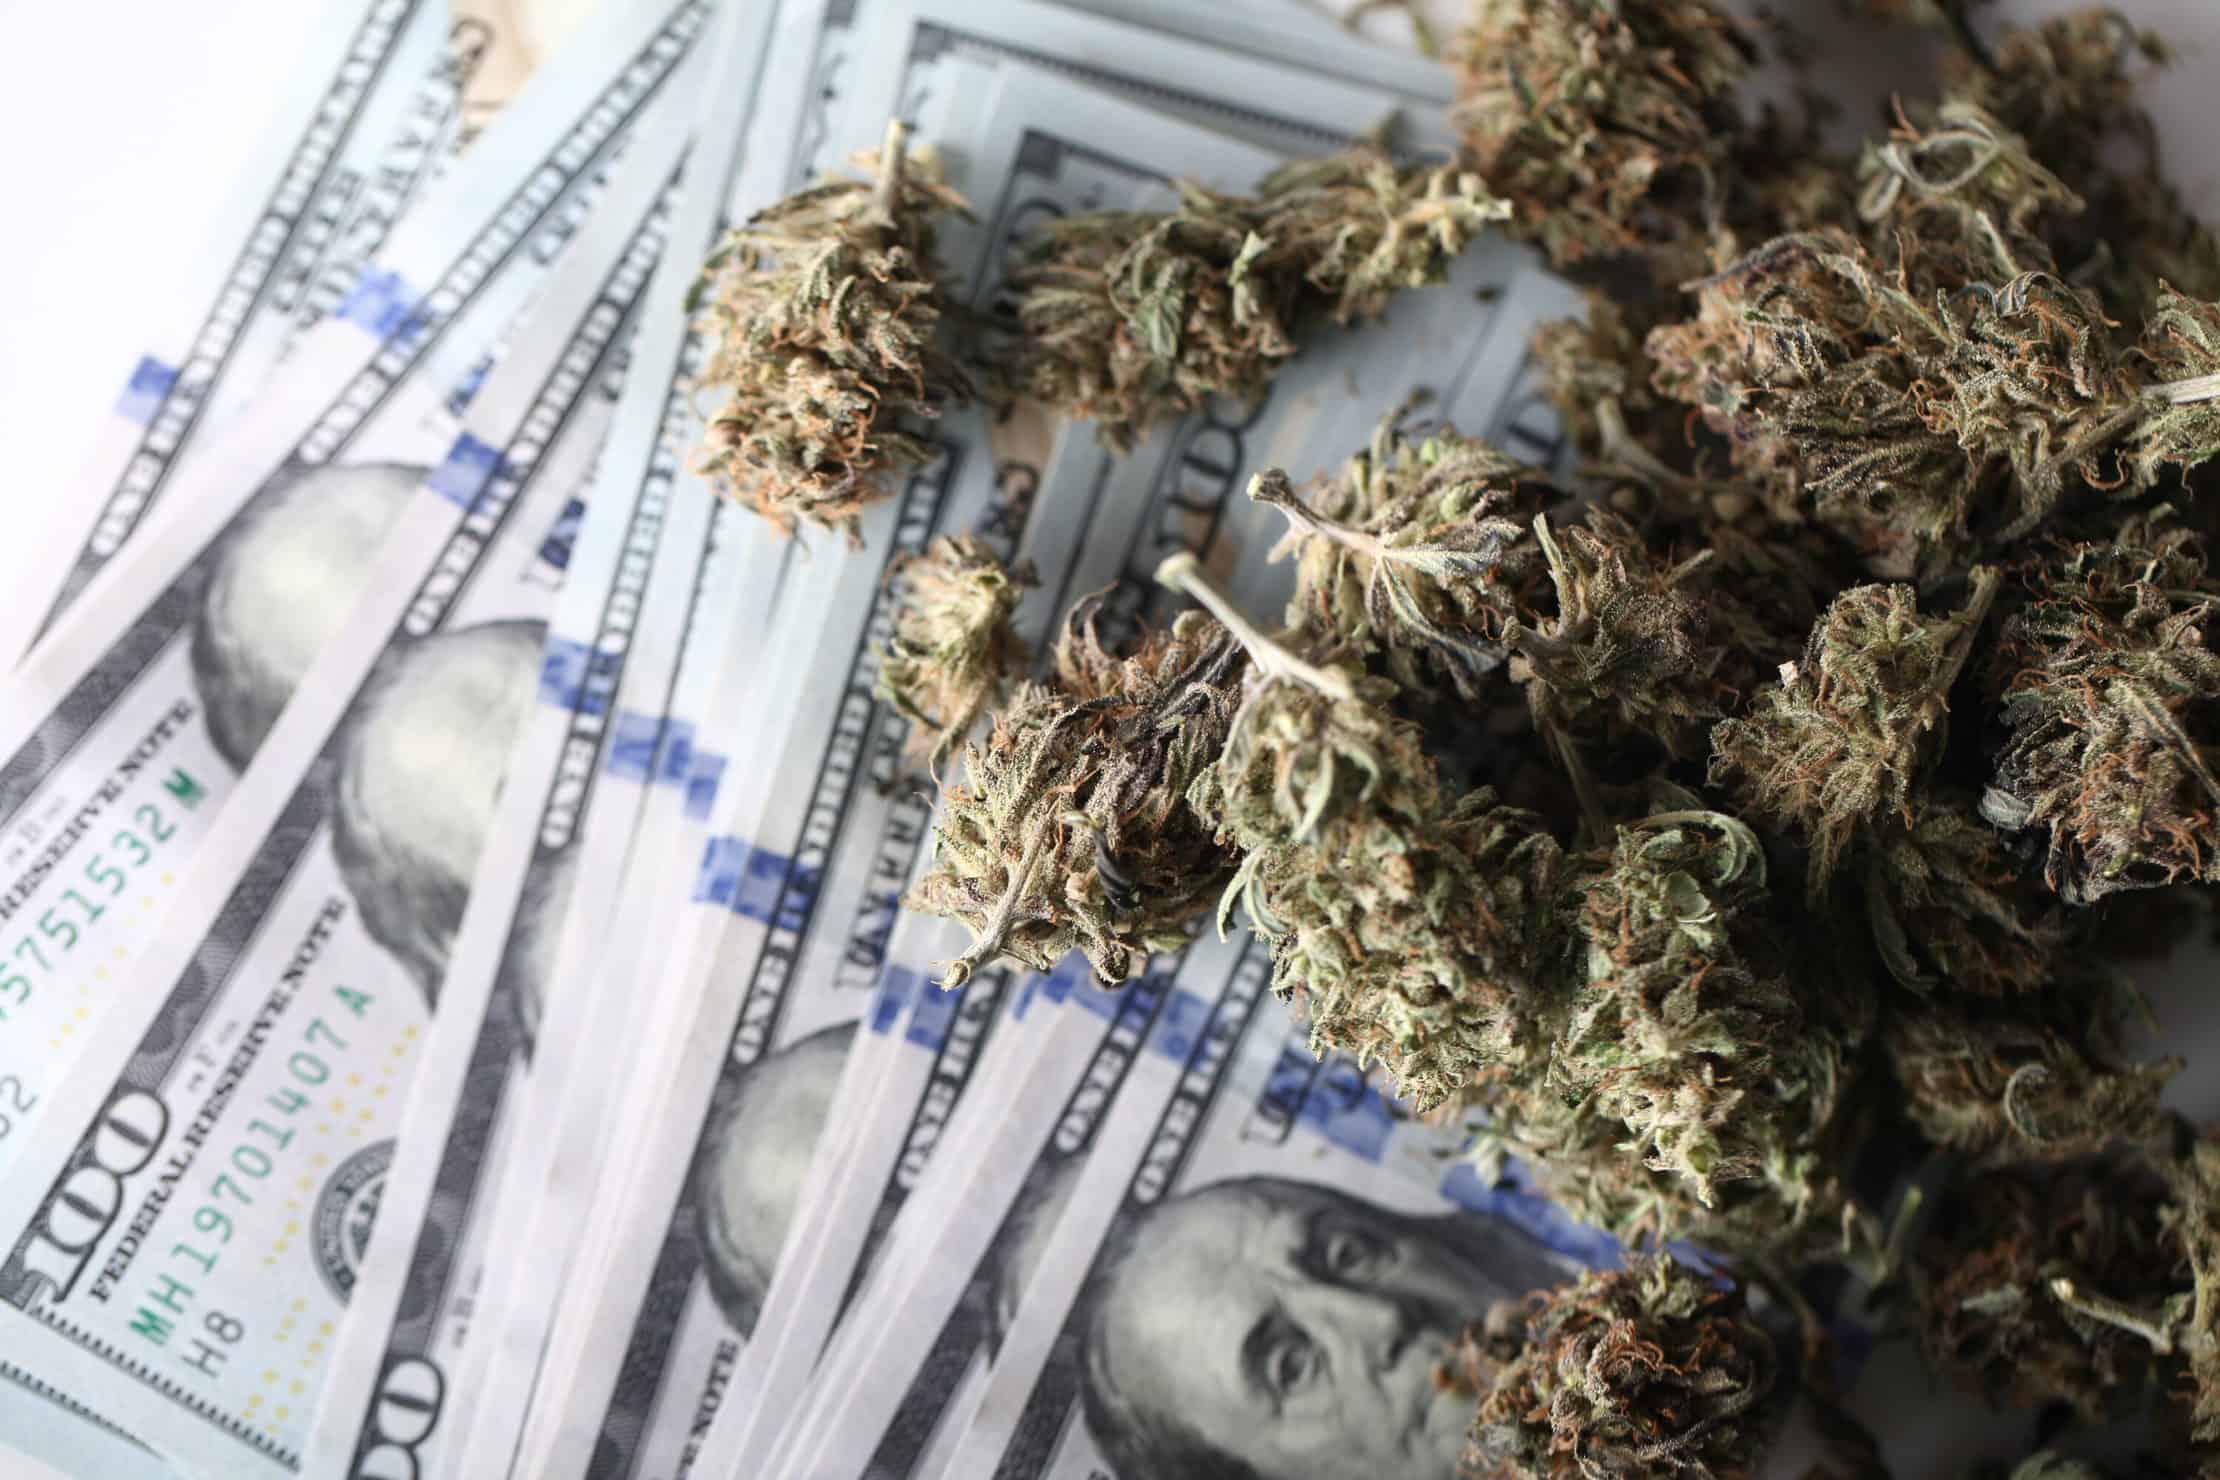 How to Make Cannabis Money